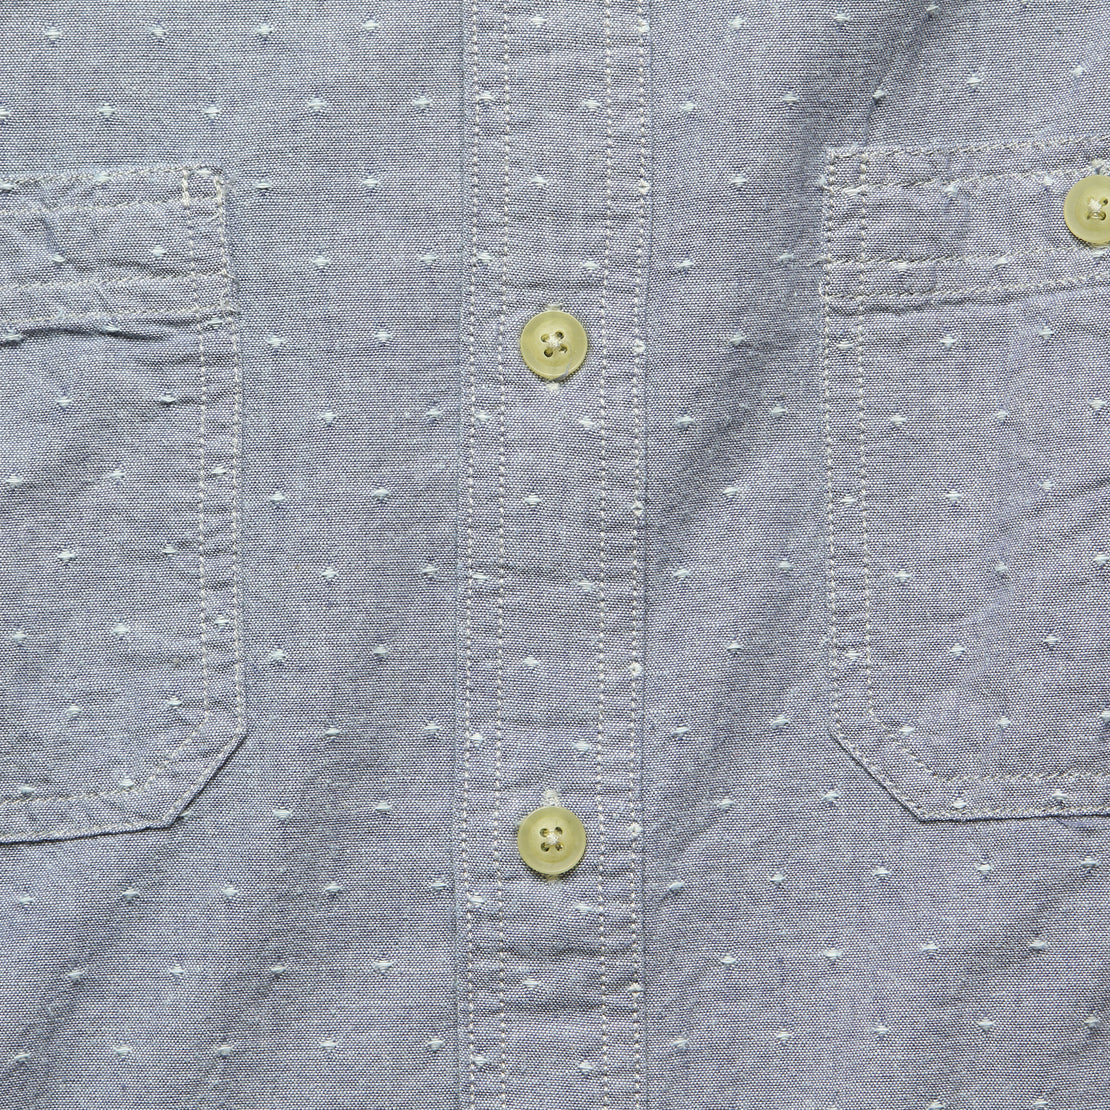 Hillwood Chambray Dobby Shirt - Blue - Grayers - STAG Provisions - Tops - L/S Woven - Other Pattern